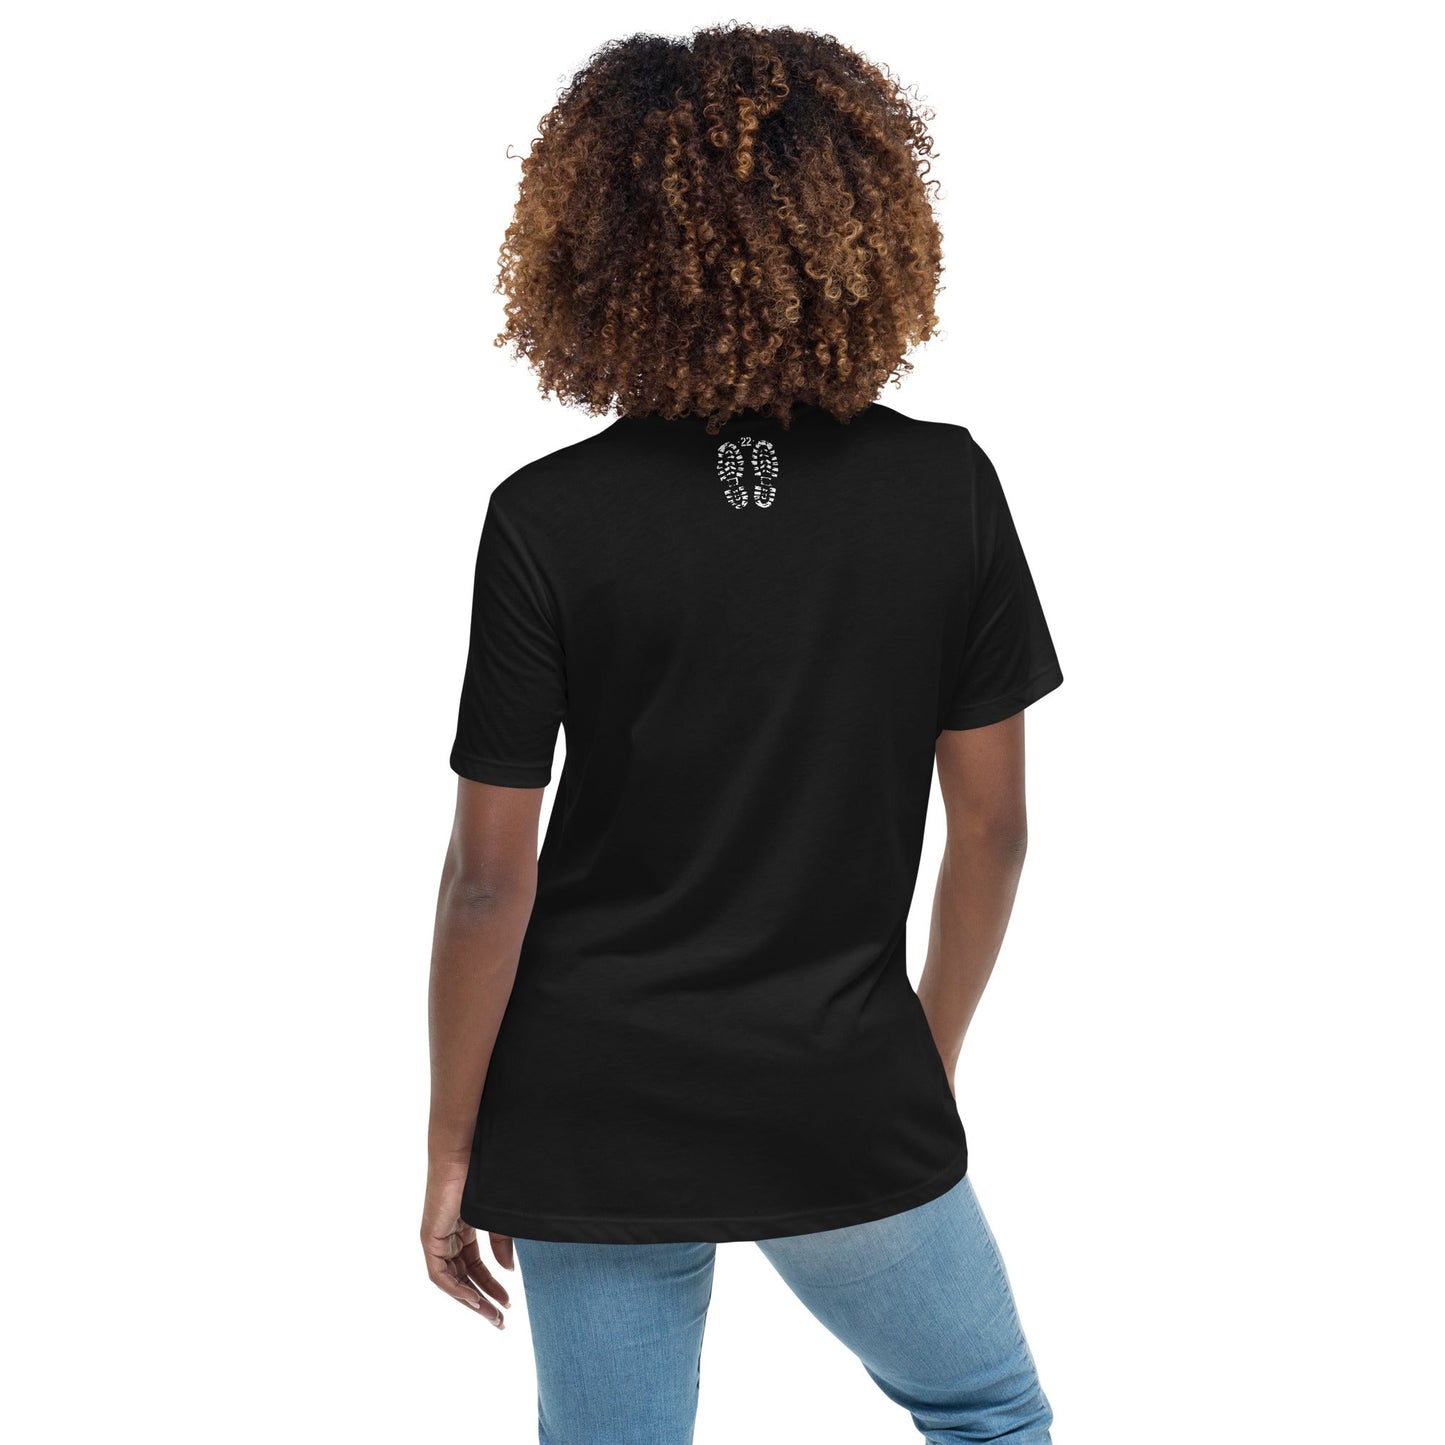 22 A Day - Women's Relaxed T-Shirt - Ordie Shack LLC